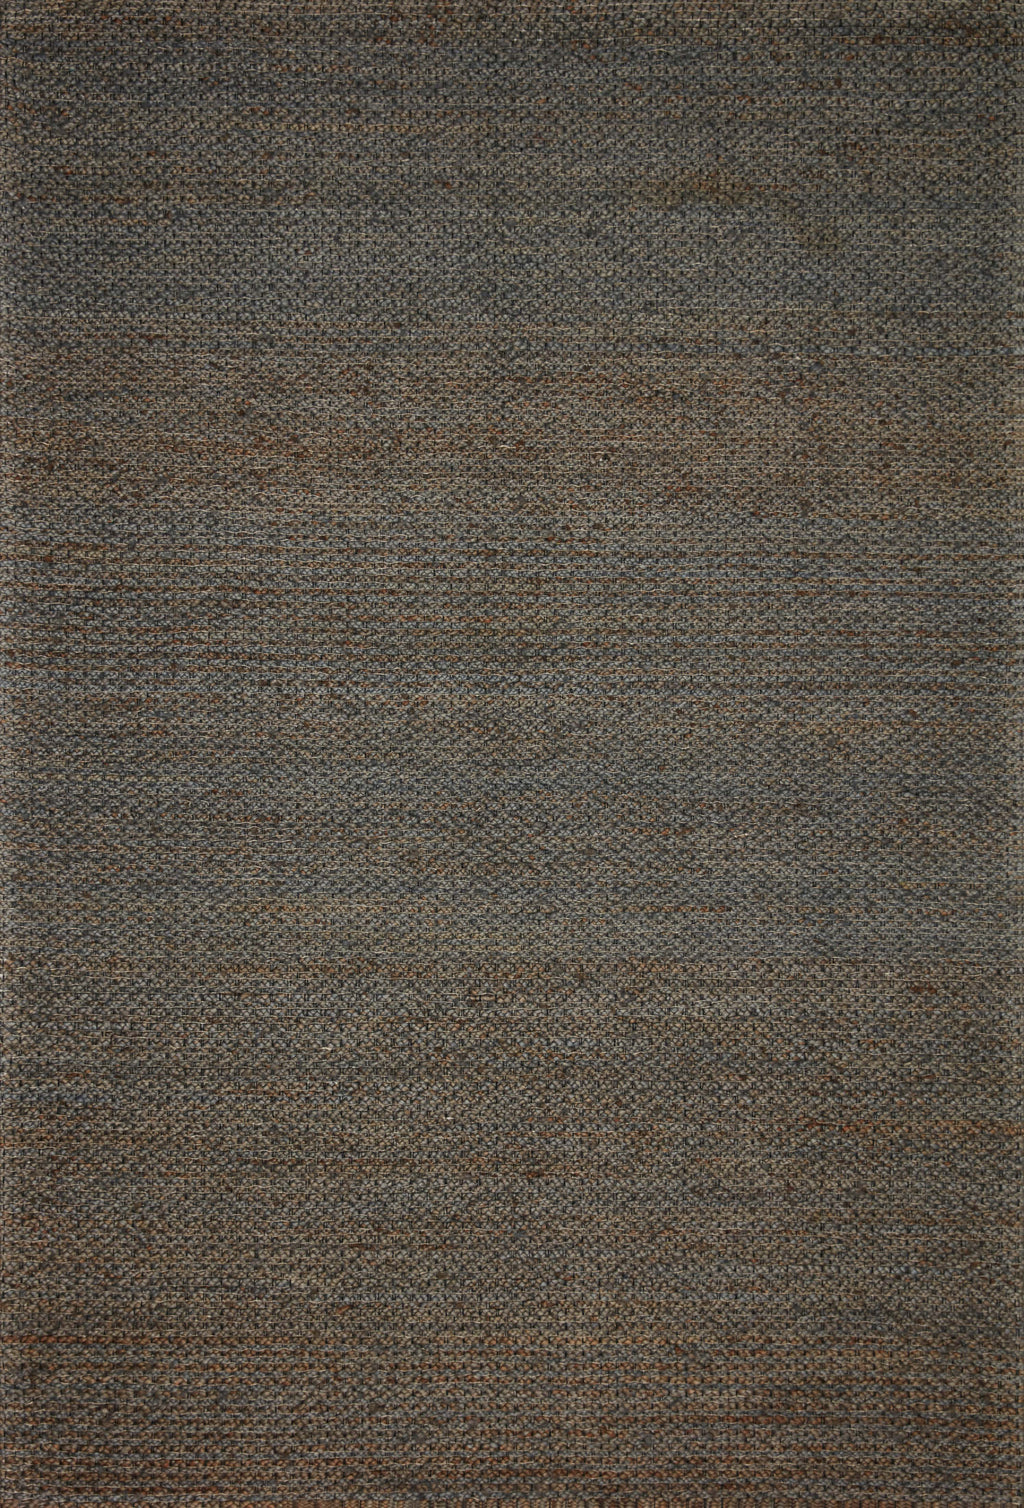 LILY Collection Rug  in  Blue Blue Accent Hand-Woven Viscose